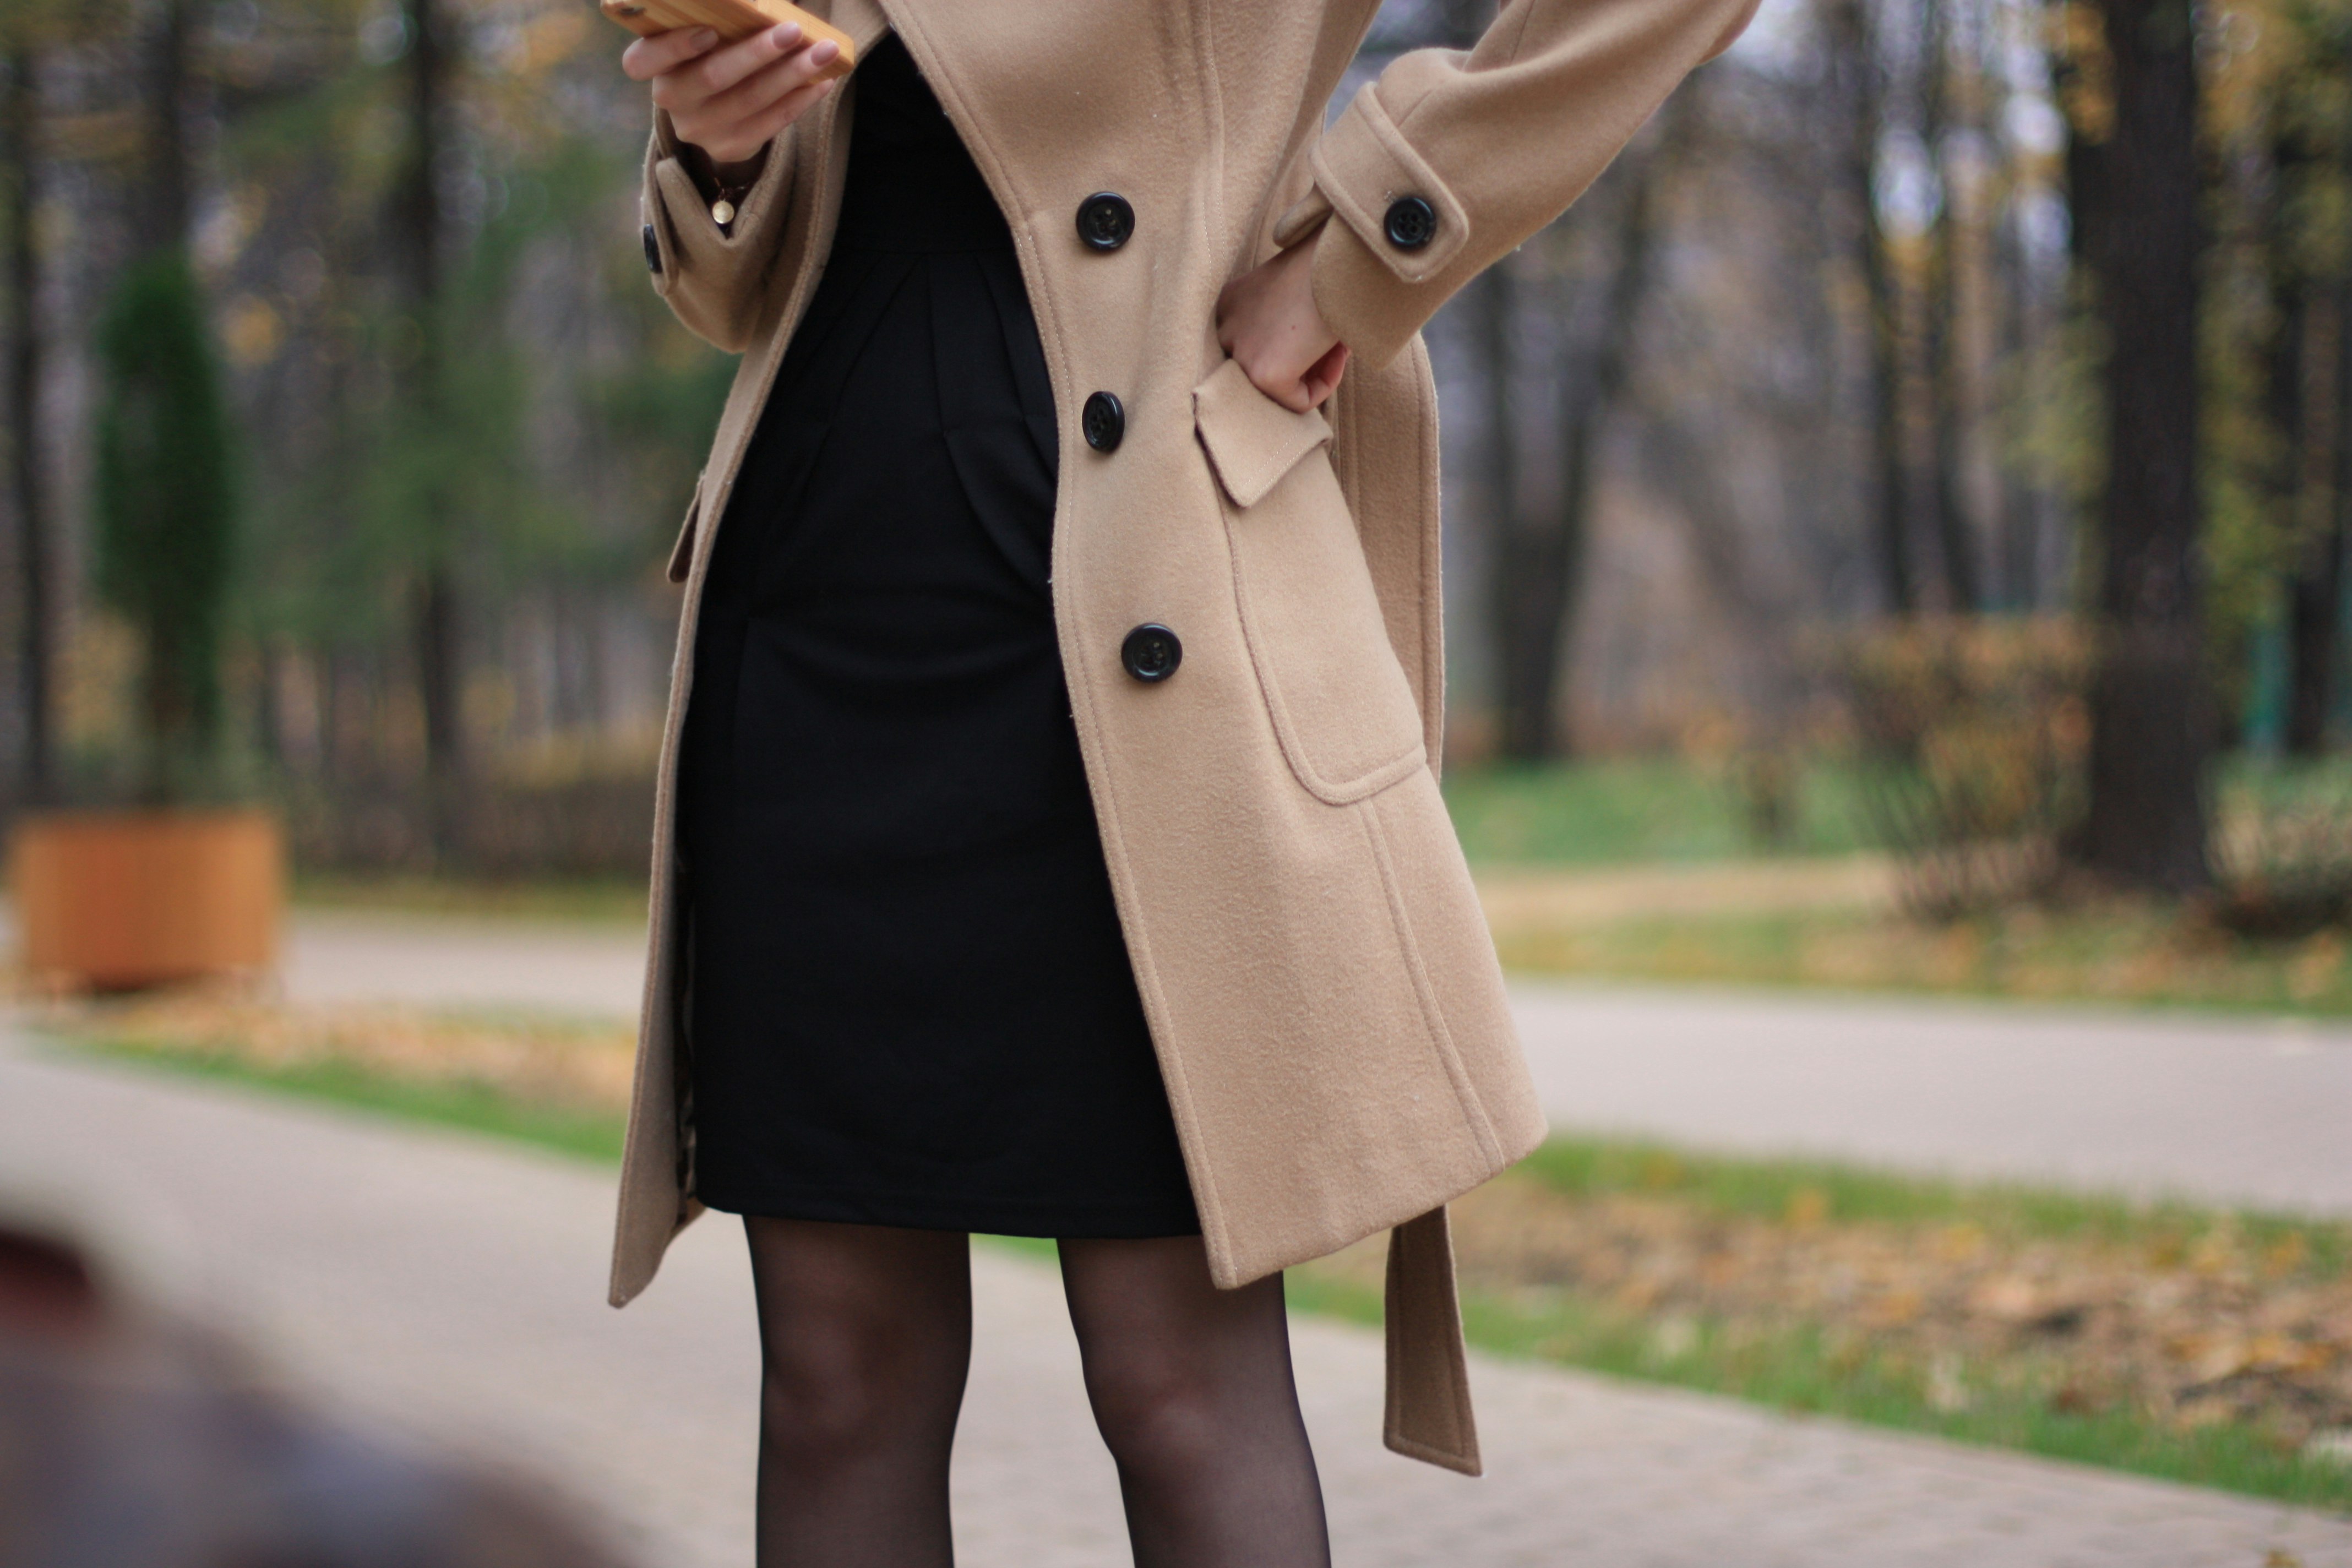 slender girl in a coat outdoors holding a smartphone in her hand